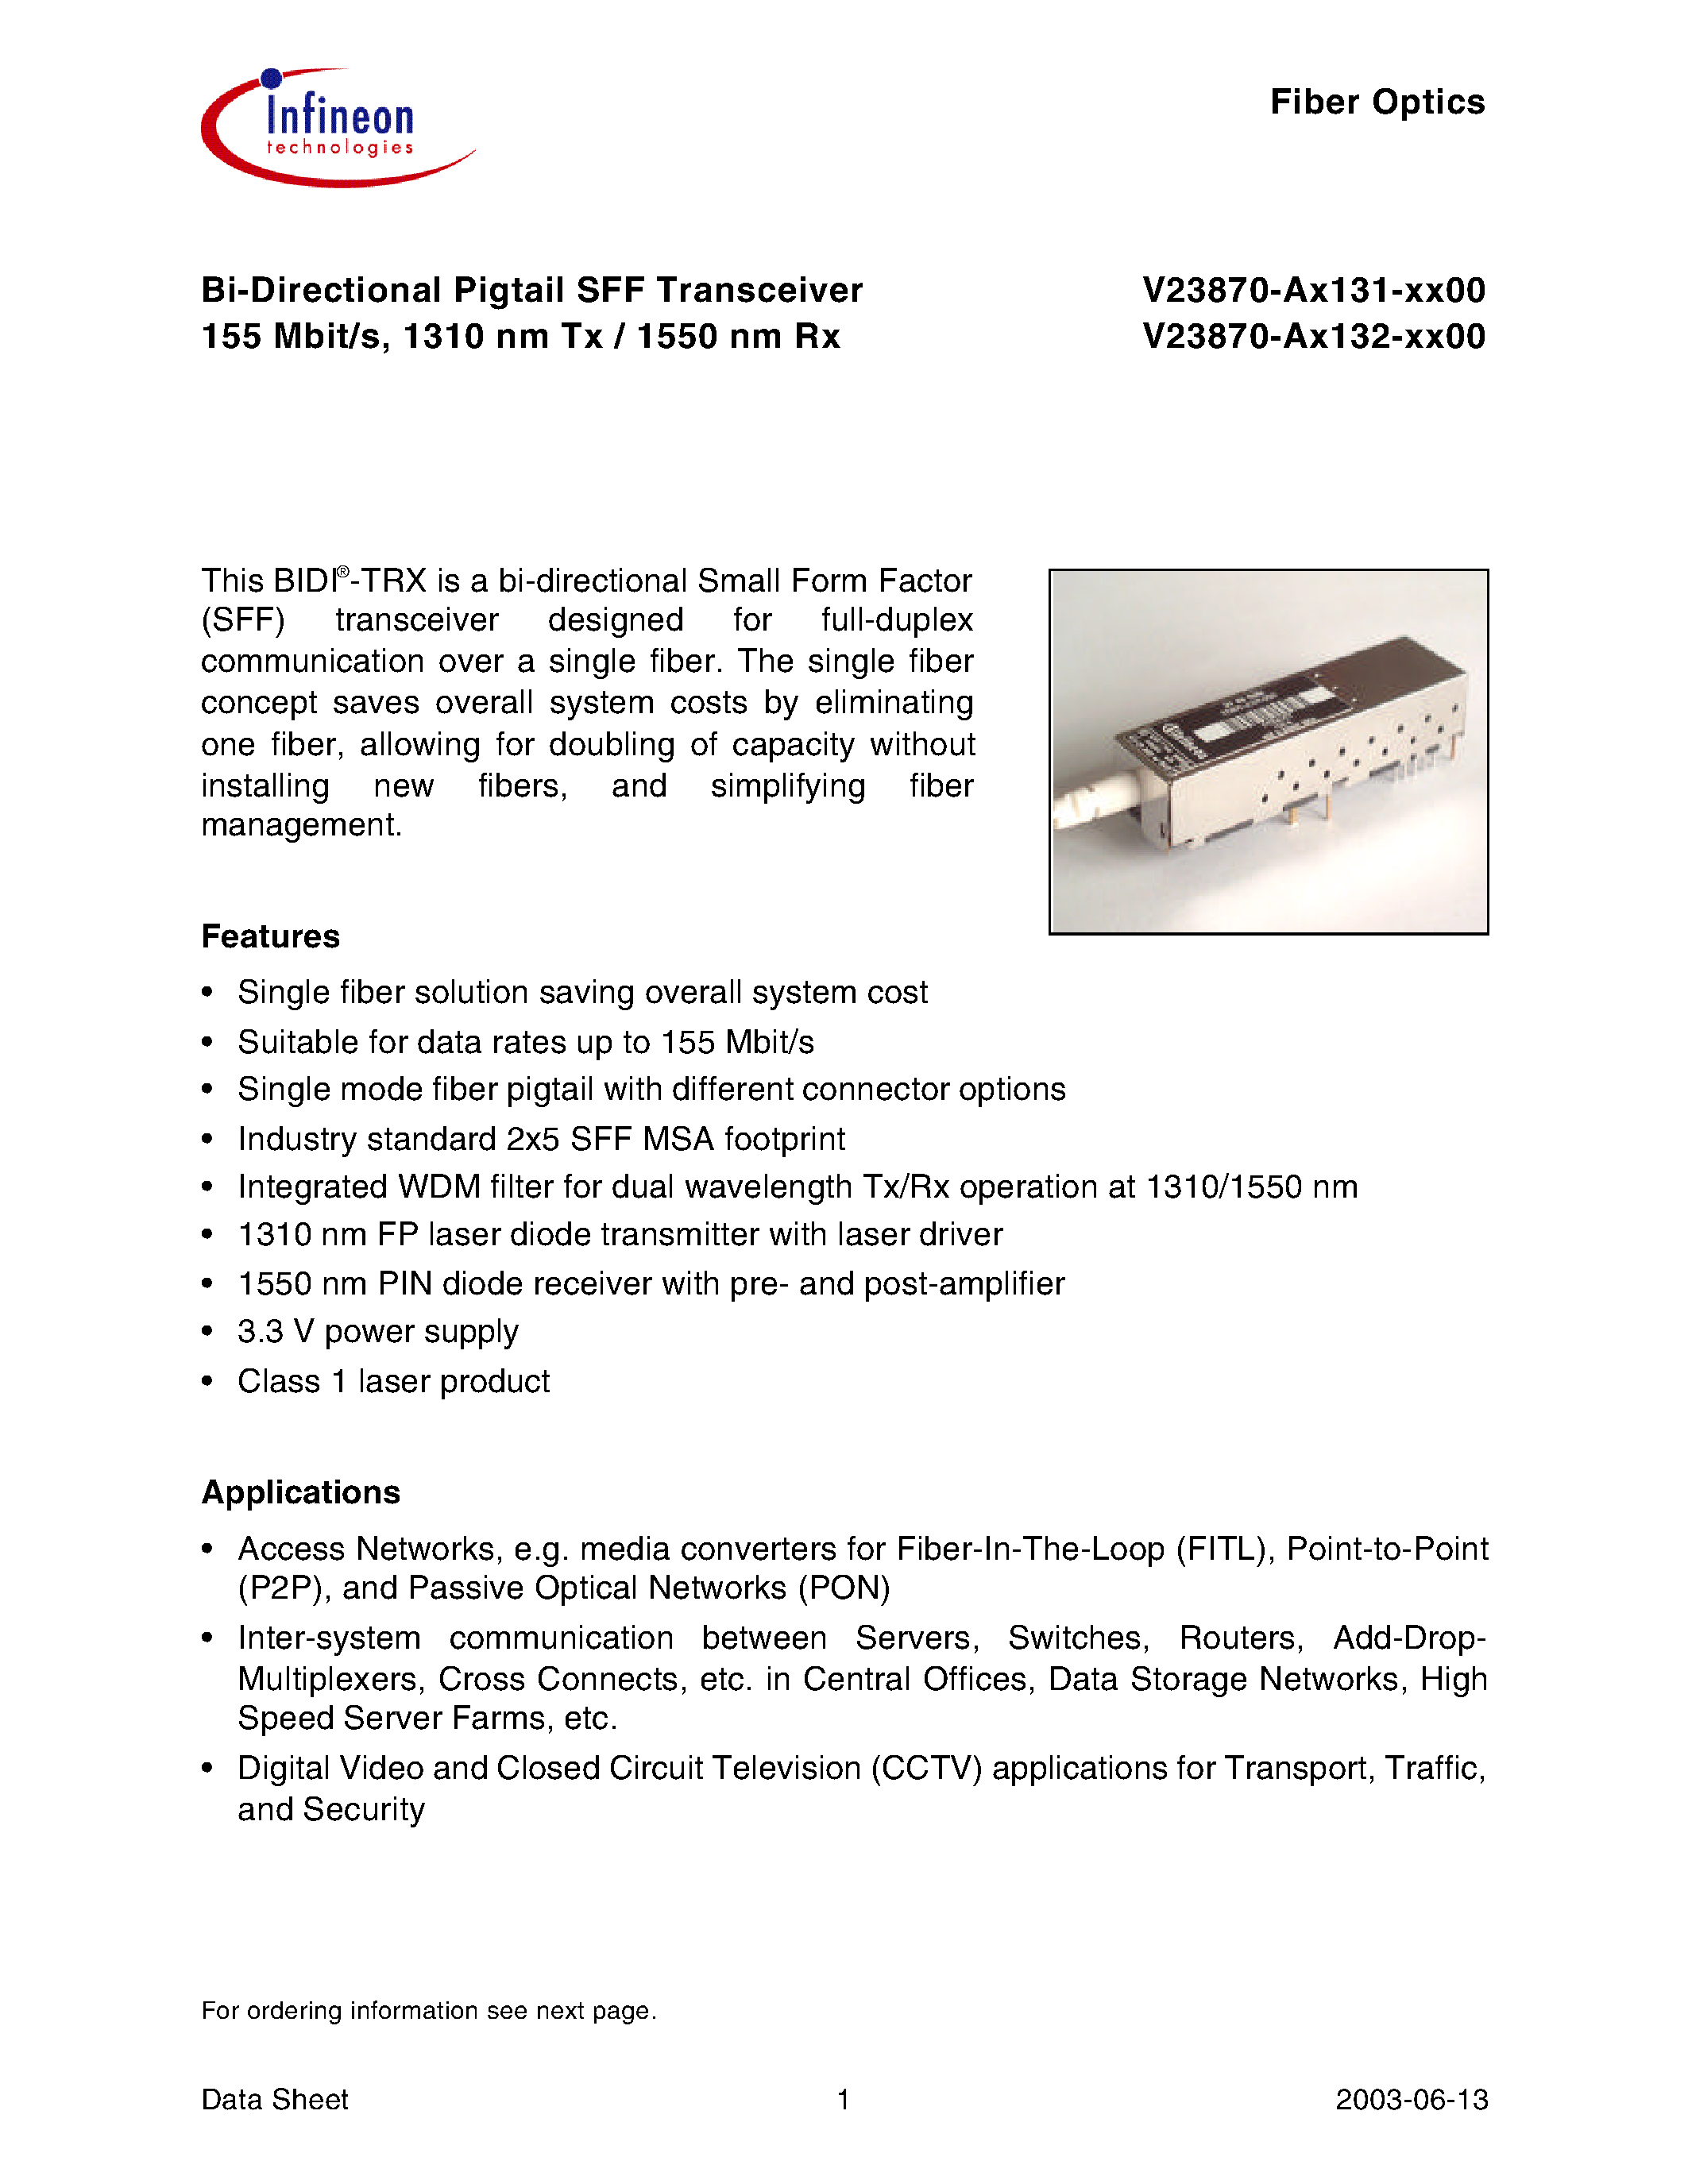 Datasheet V23870-A3131-B500 - Bi-Directional Pigtail SFF Transceiver 155 Mbit/s/ 1310 nm Tx / 1550 nm Rx page 1